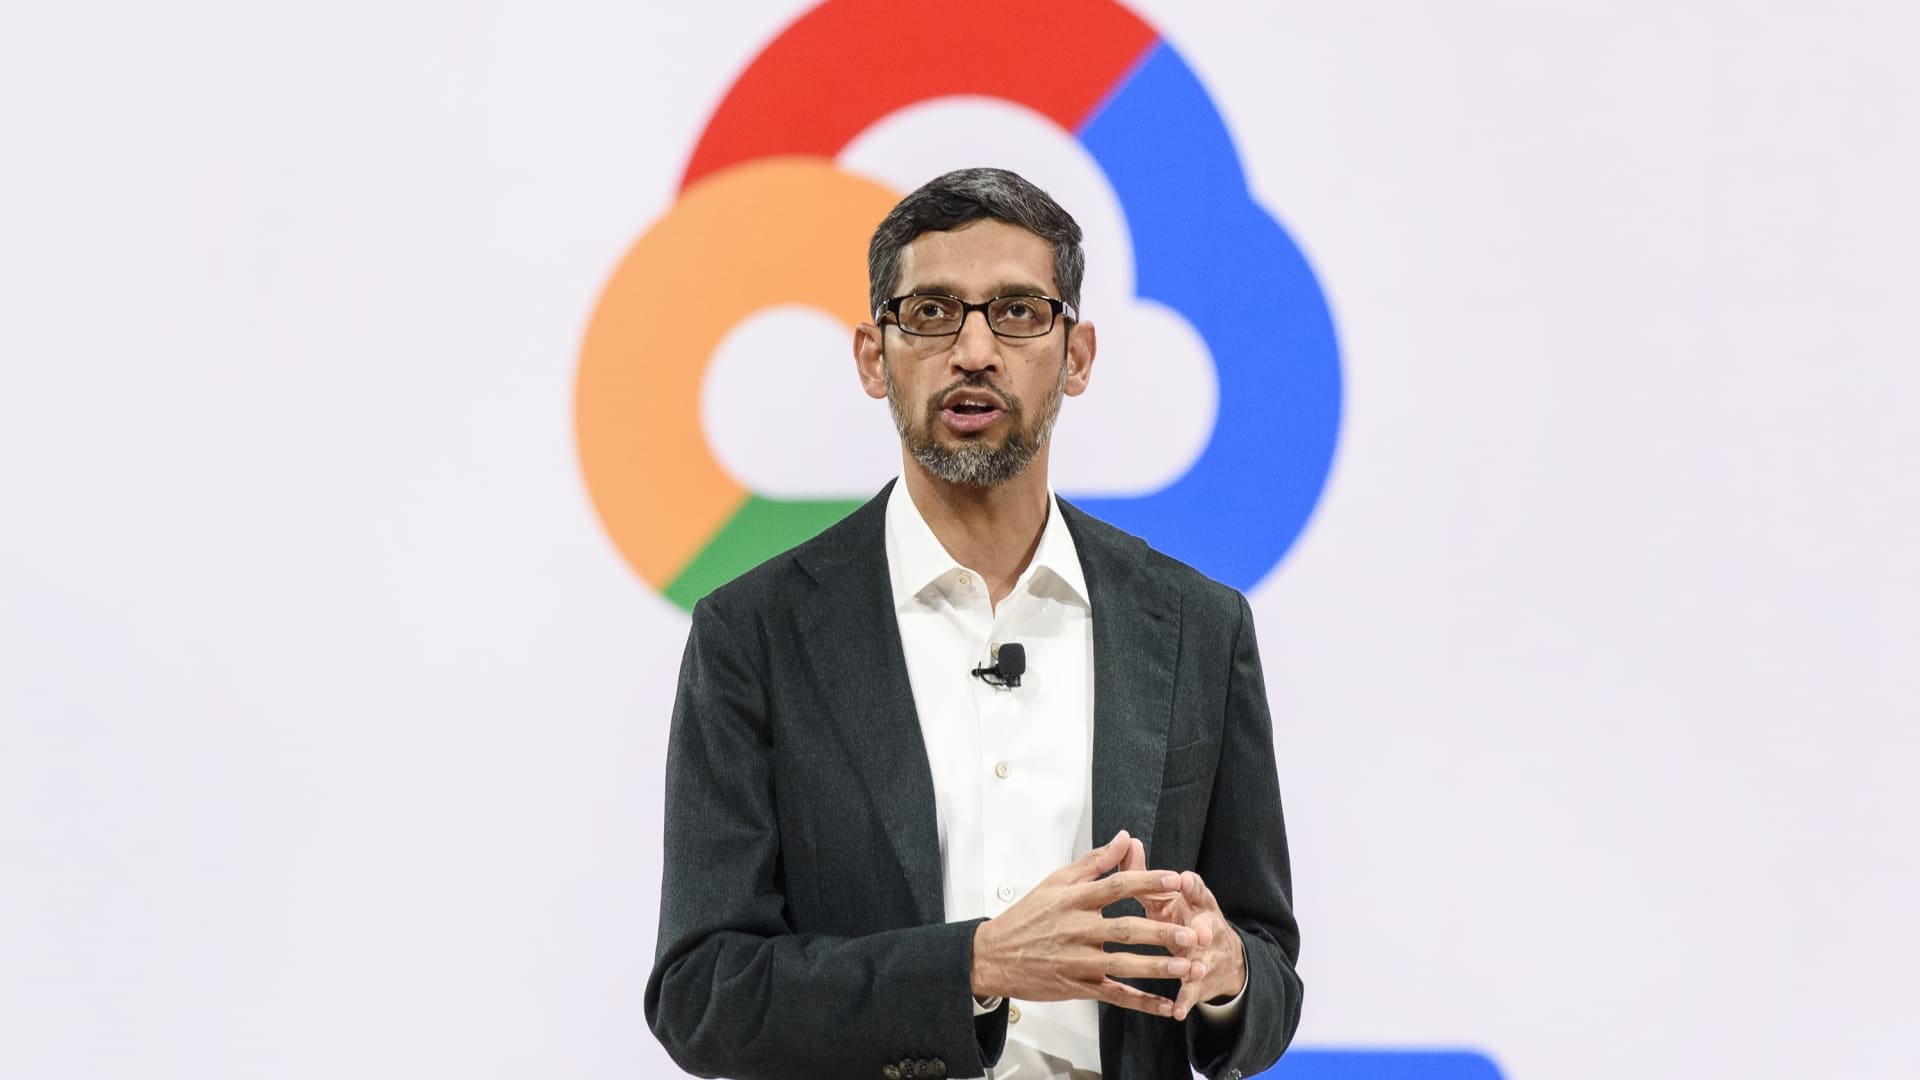 Alphabet stock just had its worst day since March 2020